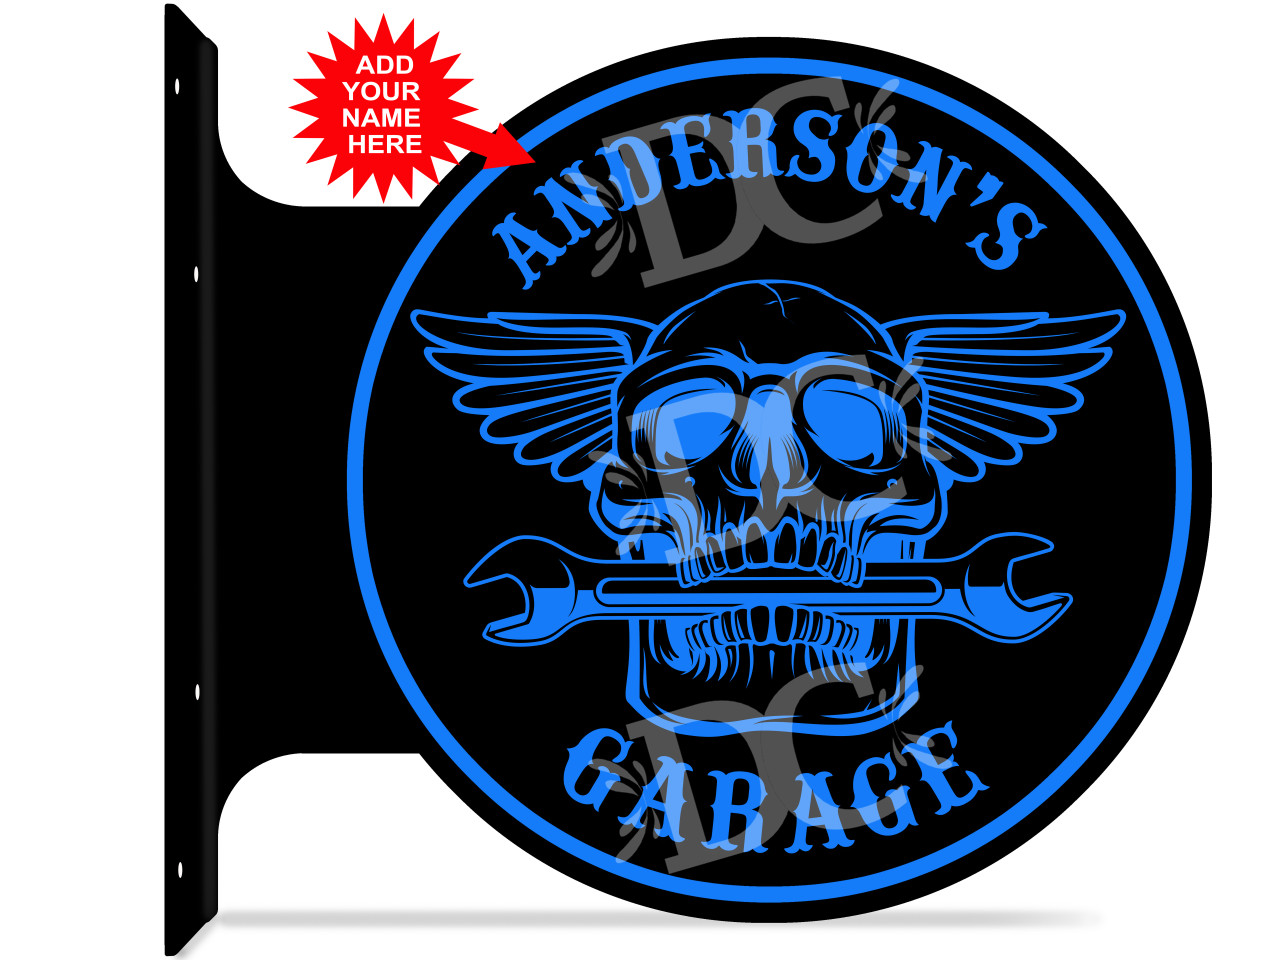 Personalized PIN UP PISTON Garage Sign Printed w YOUR NAME Aluminum Sign dd#393 